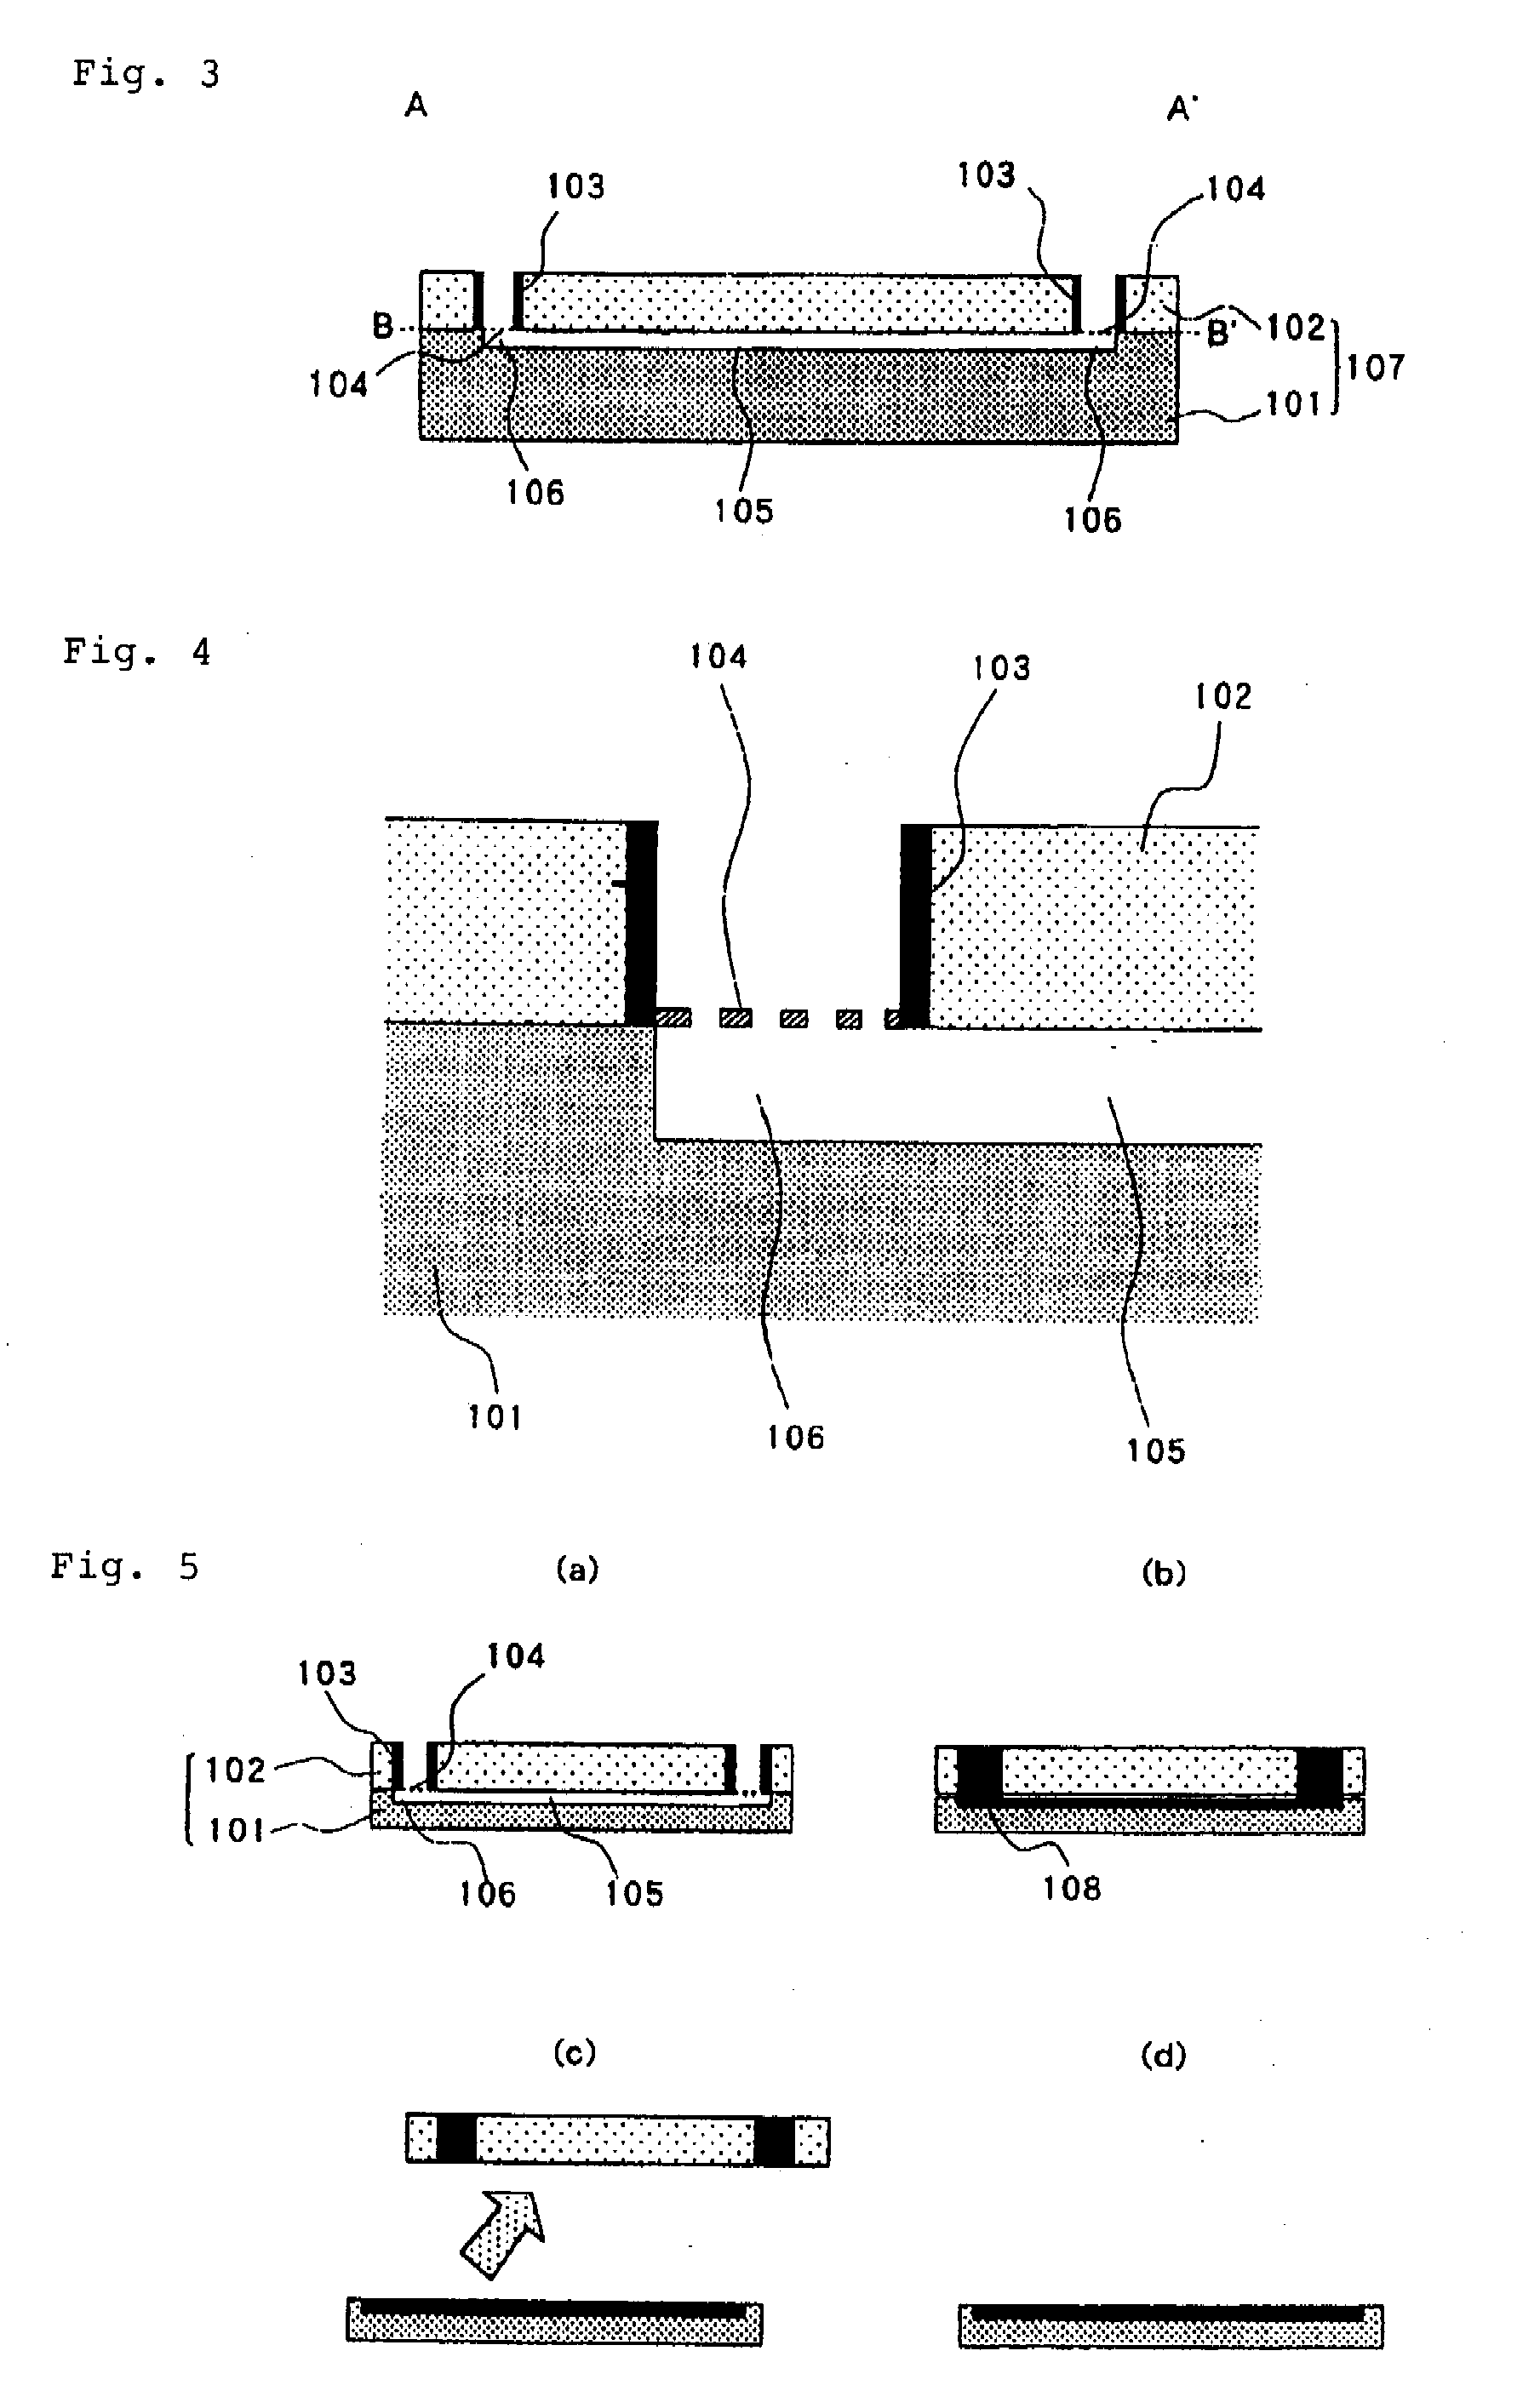 Microchip and analysis method using the microchip